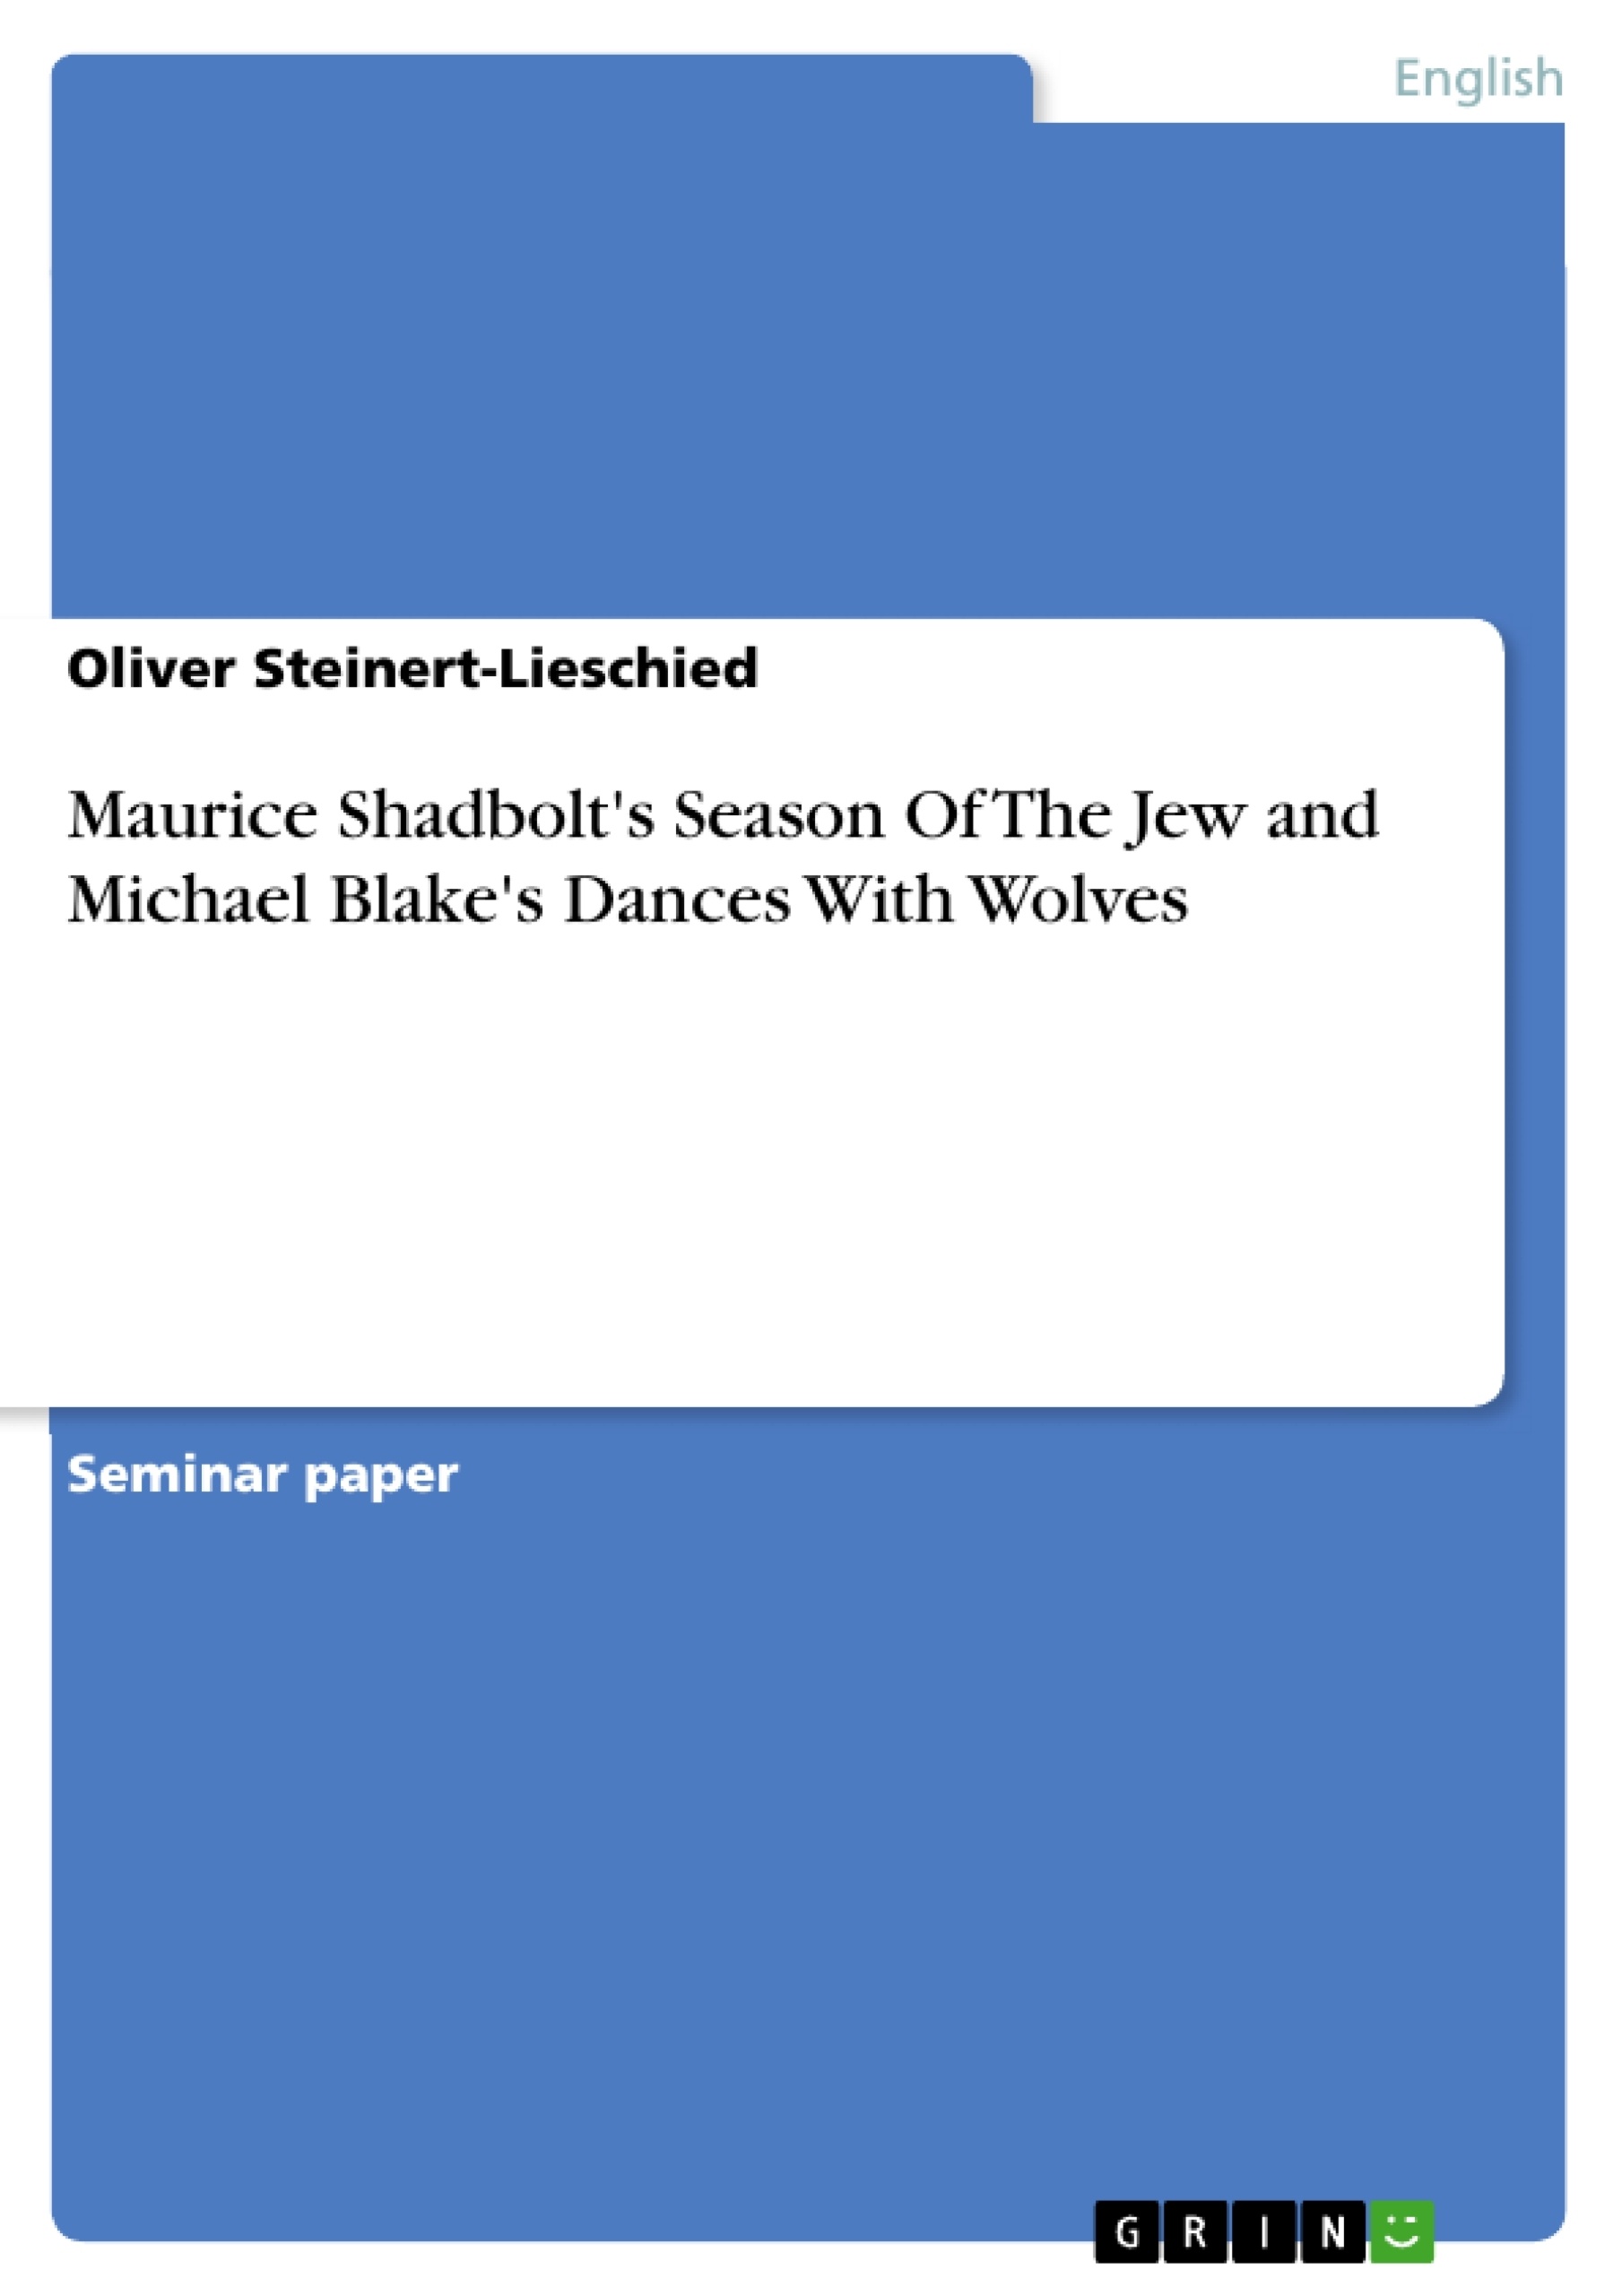 Titre: Maurice Shadbolt's Season Of The Jew and Michael Blake's Dances With Wolves